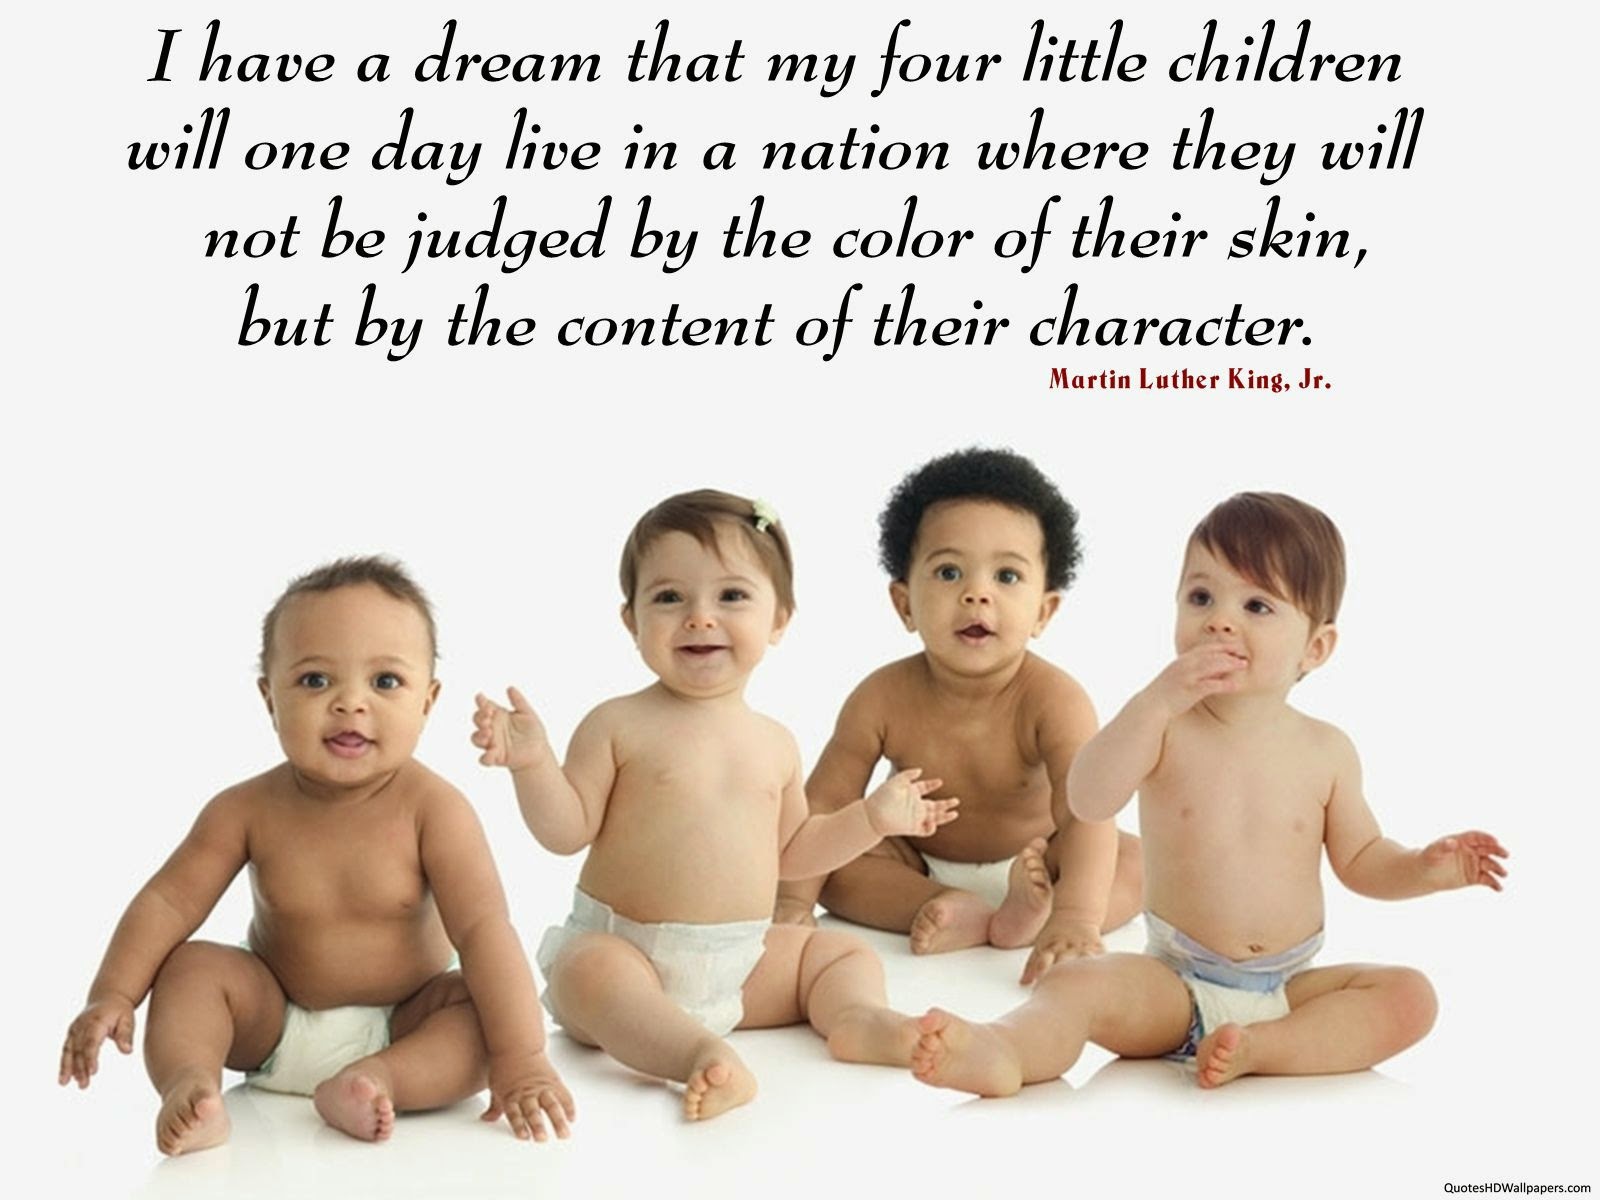 I have a dream that my four little children will one day live in a nation... #color #skin #character #MartinLutherKingJr #judged